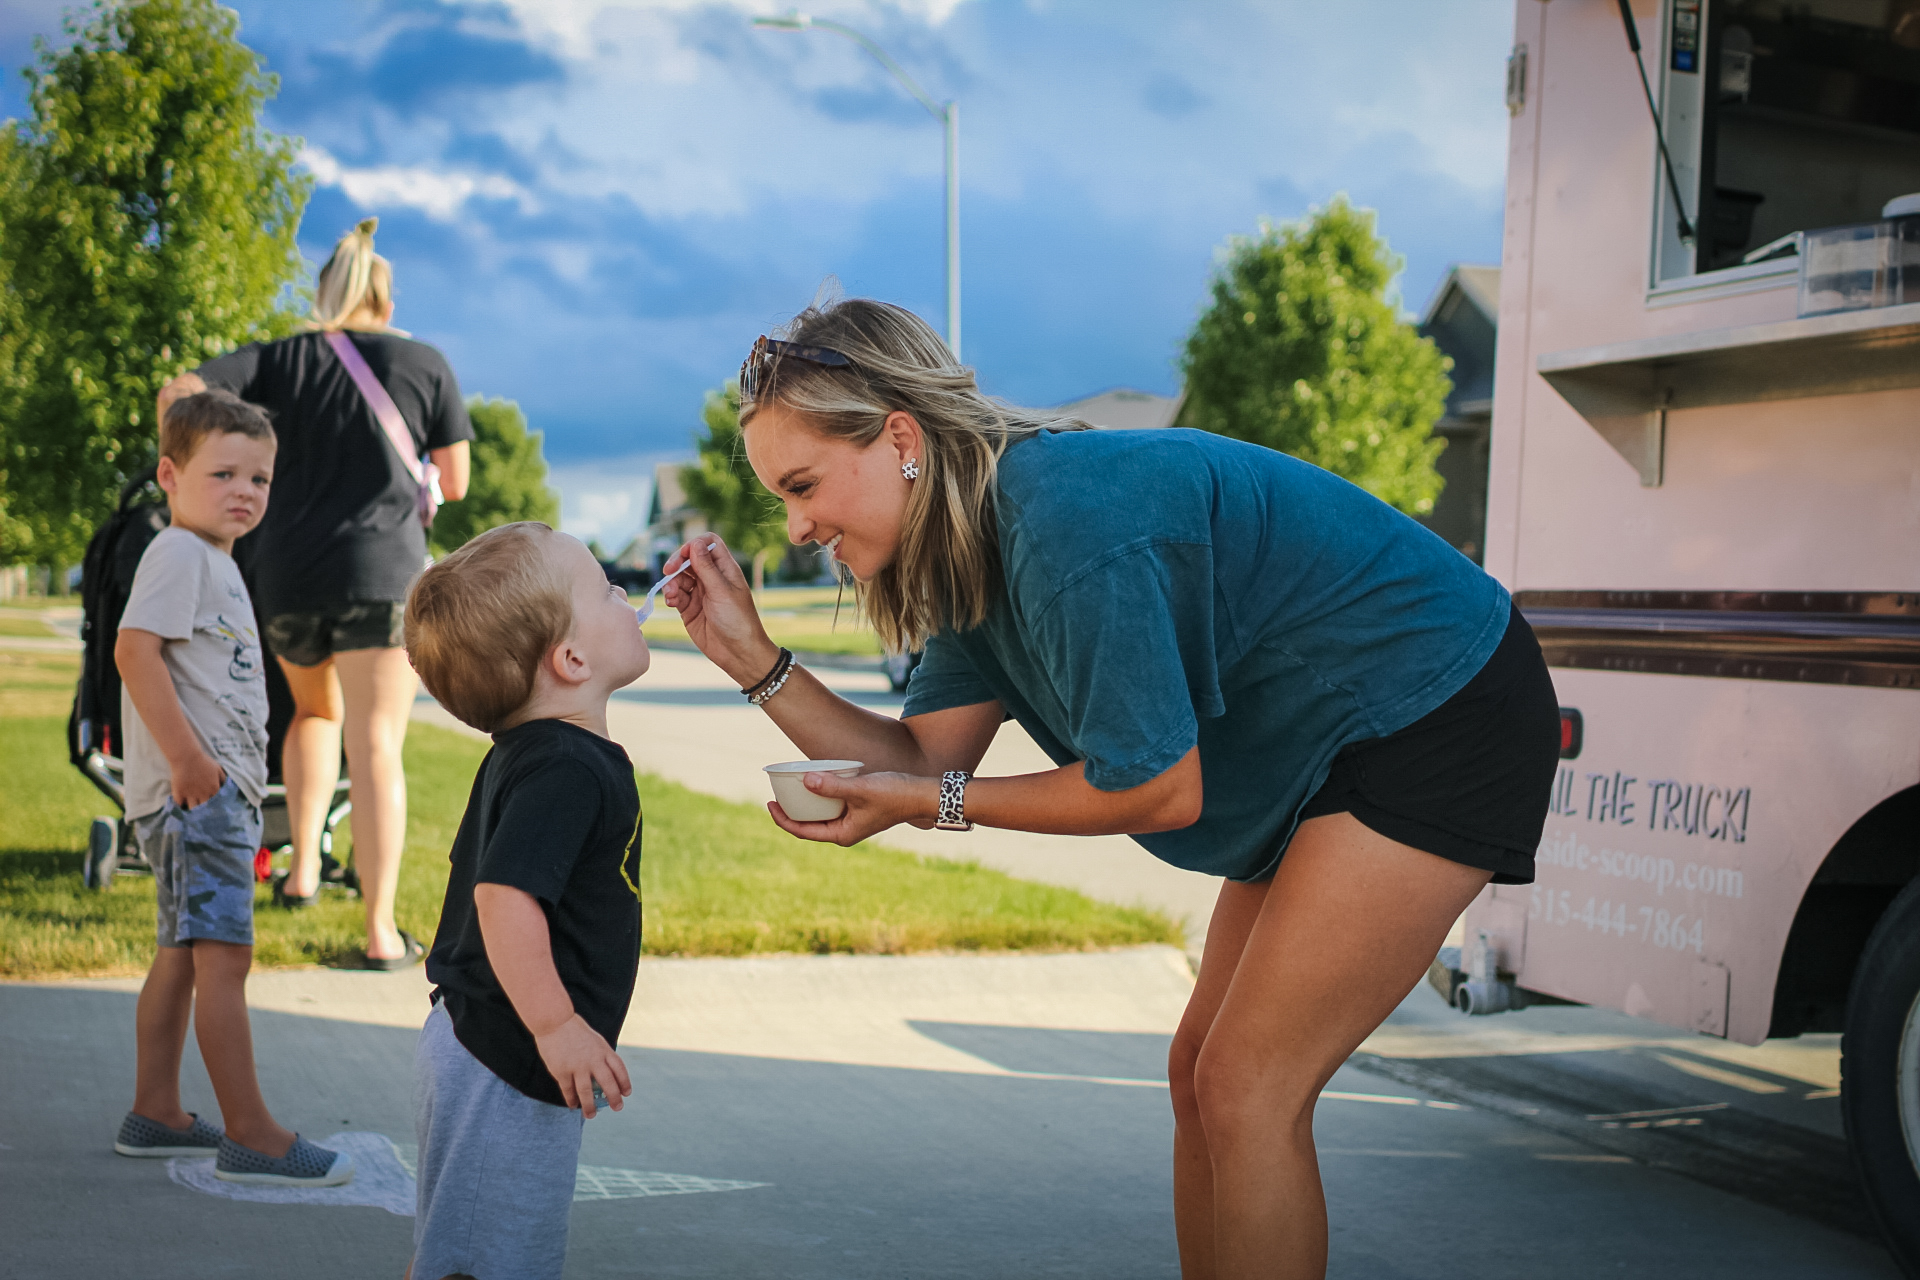 A young woman spoons ice cream into a young boy's mouth.